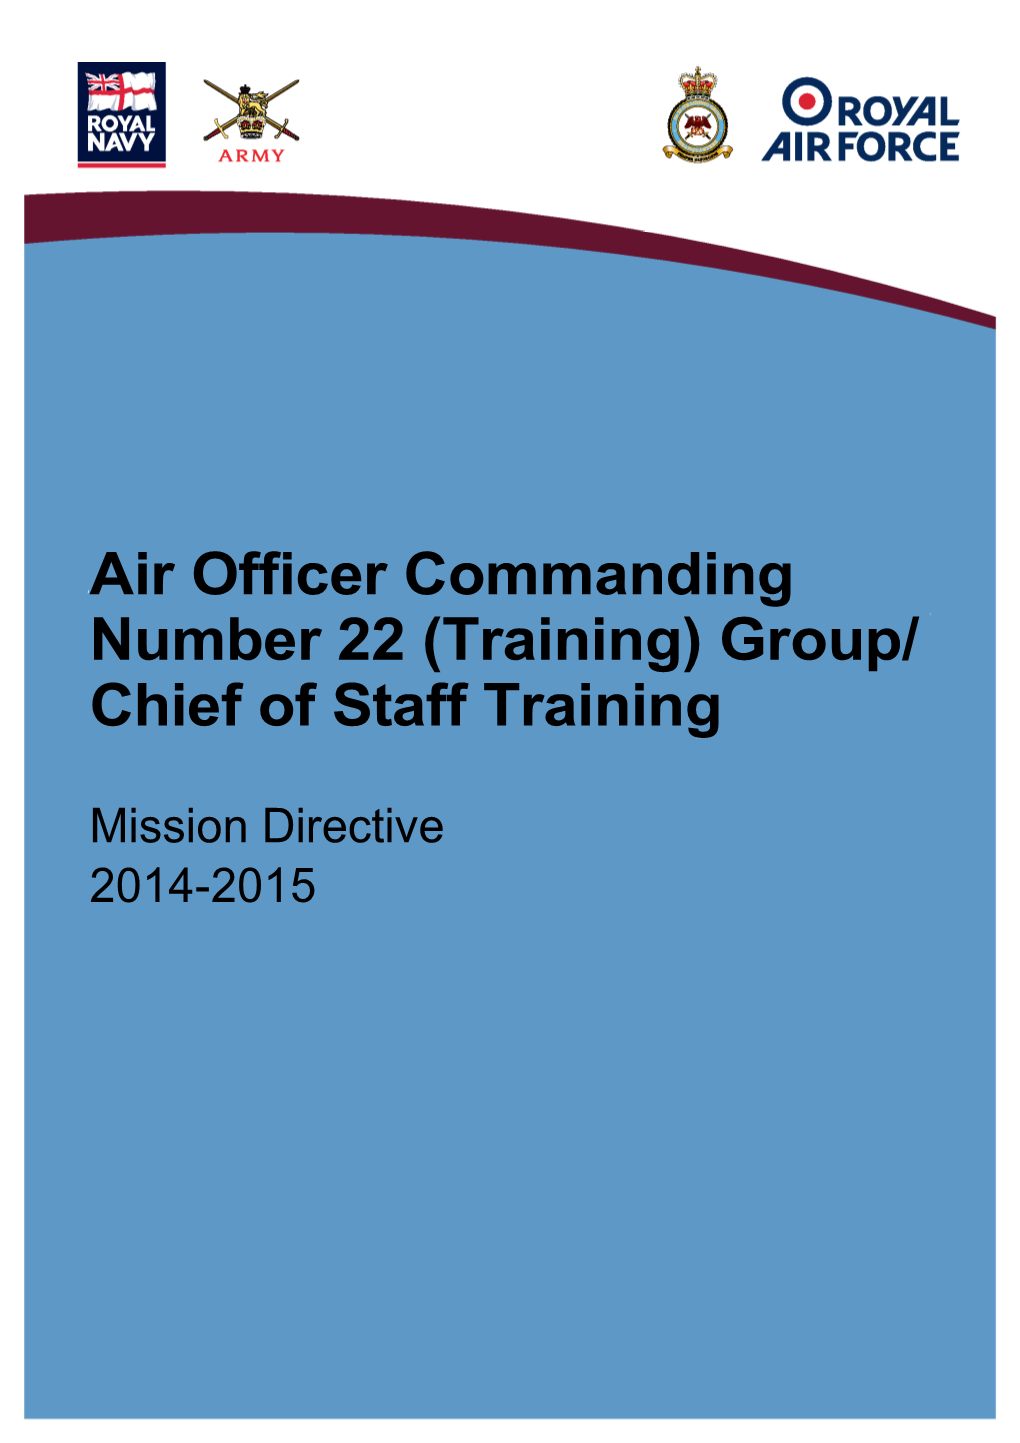 Air Officer Commanding Number 22 (Training) Group/ Chief of Staff Training